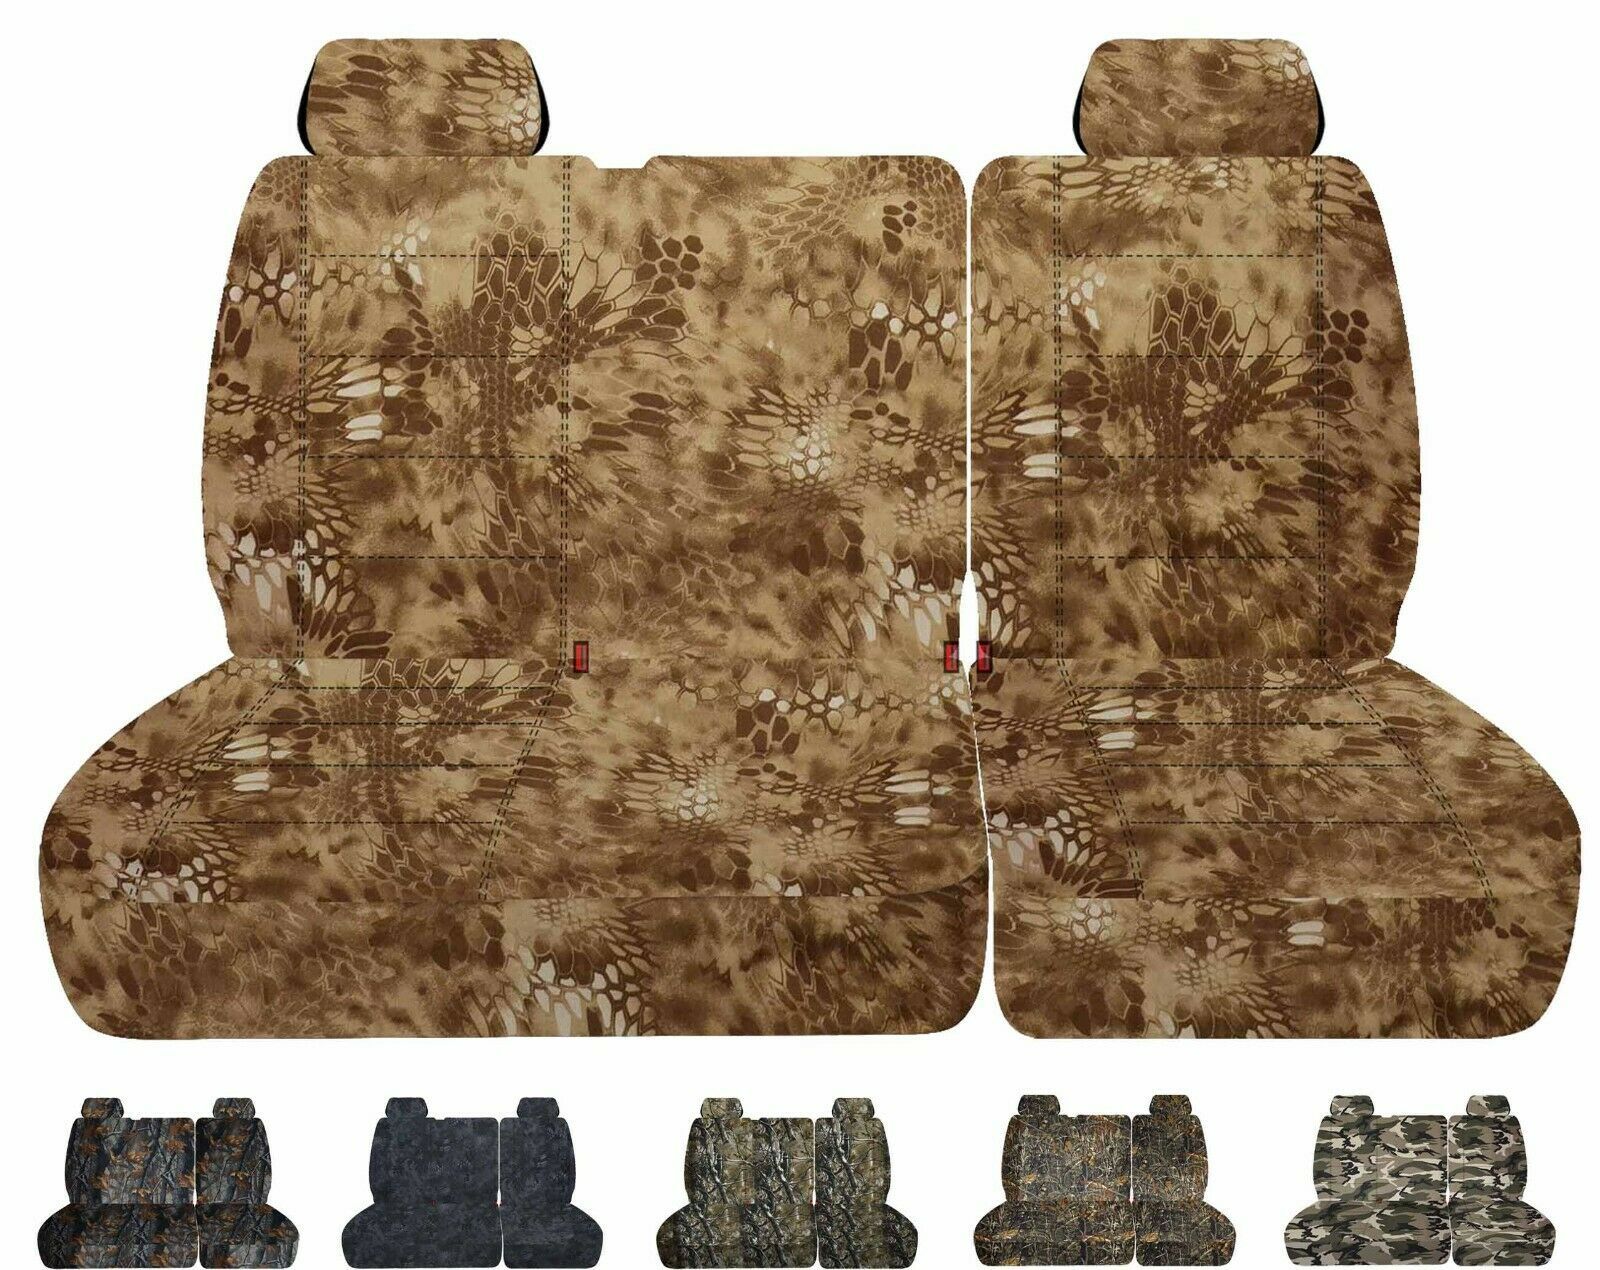 40/60 Front bench seat covers with headrests fits Chevy C/K 1500 Pickup 1988-94